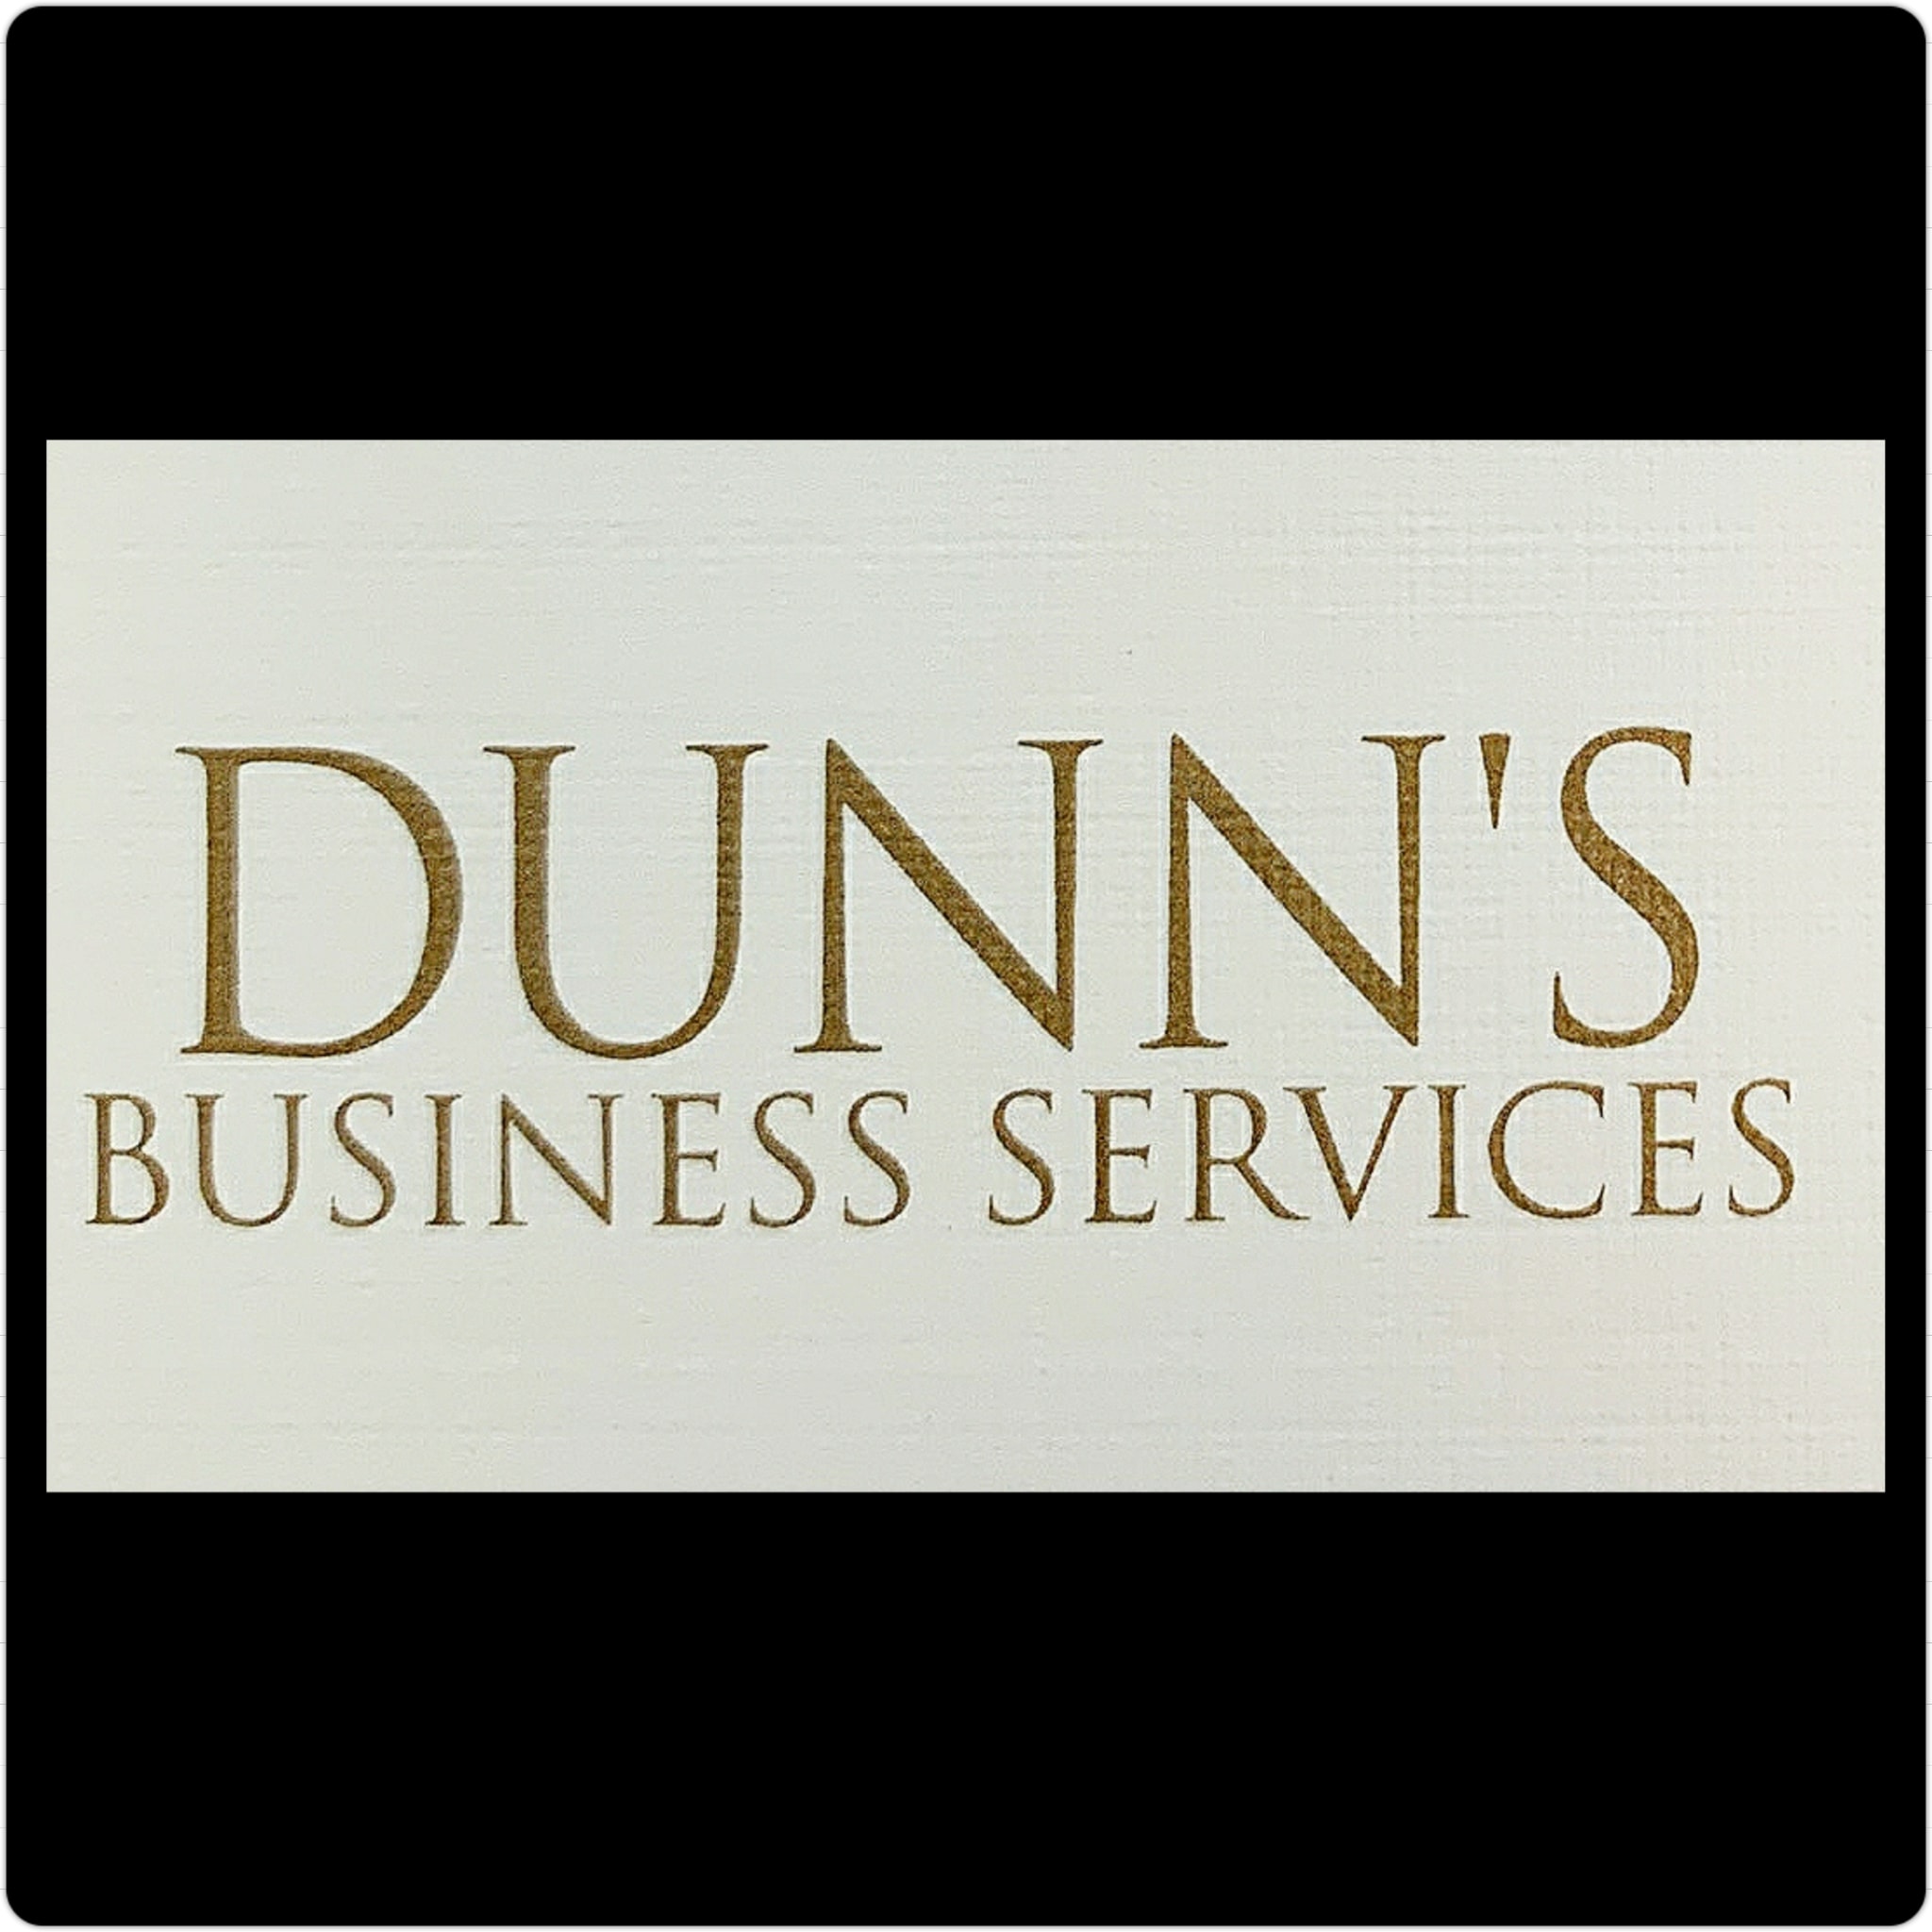 Dunn's Business Services